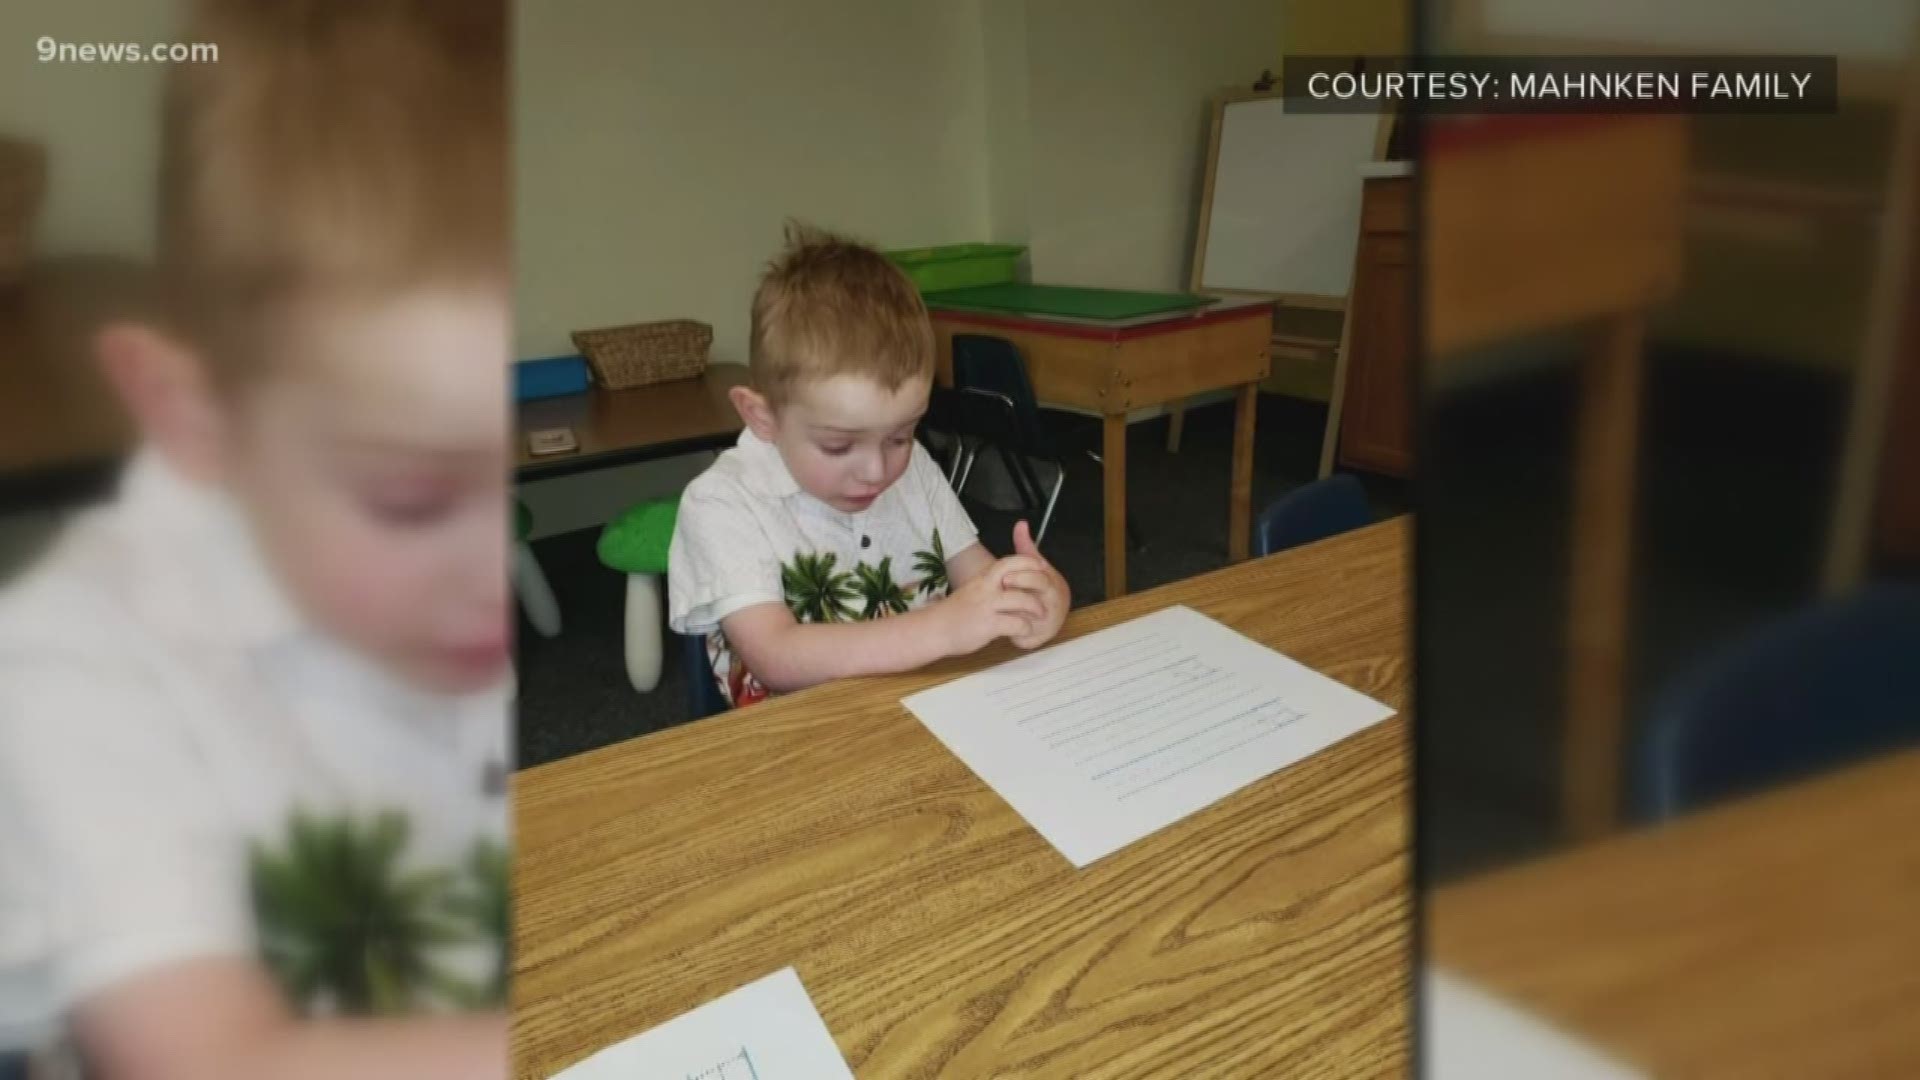 As we close out Childhood Cancer Awareness month, we wanted to recognize the thousands of children dealing with cancer. Here's 4-year-old Eli Mahnken’s story.